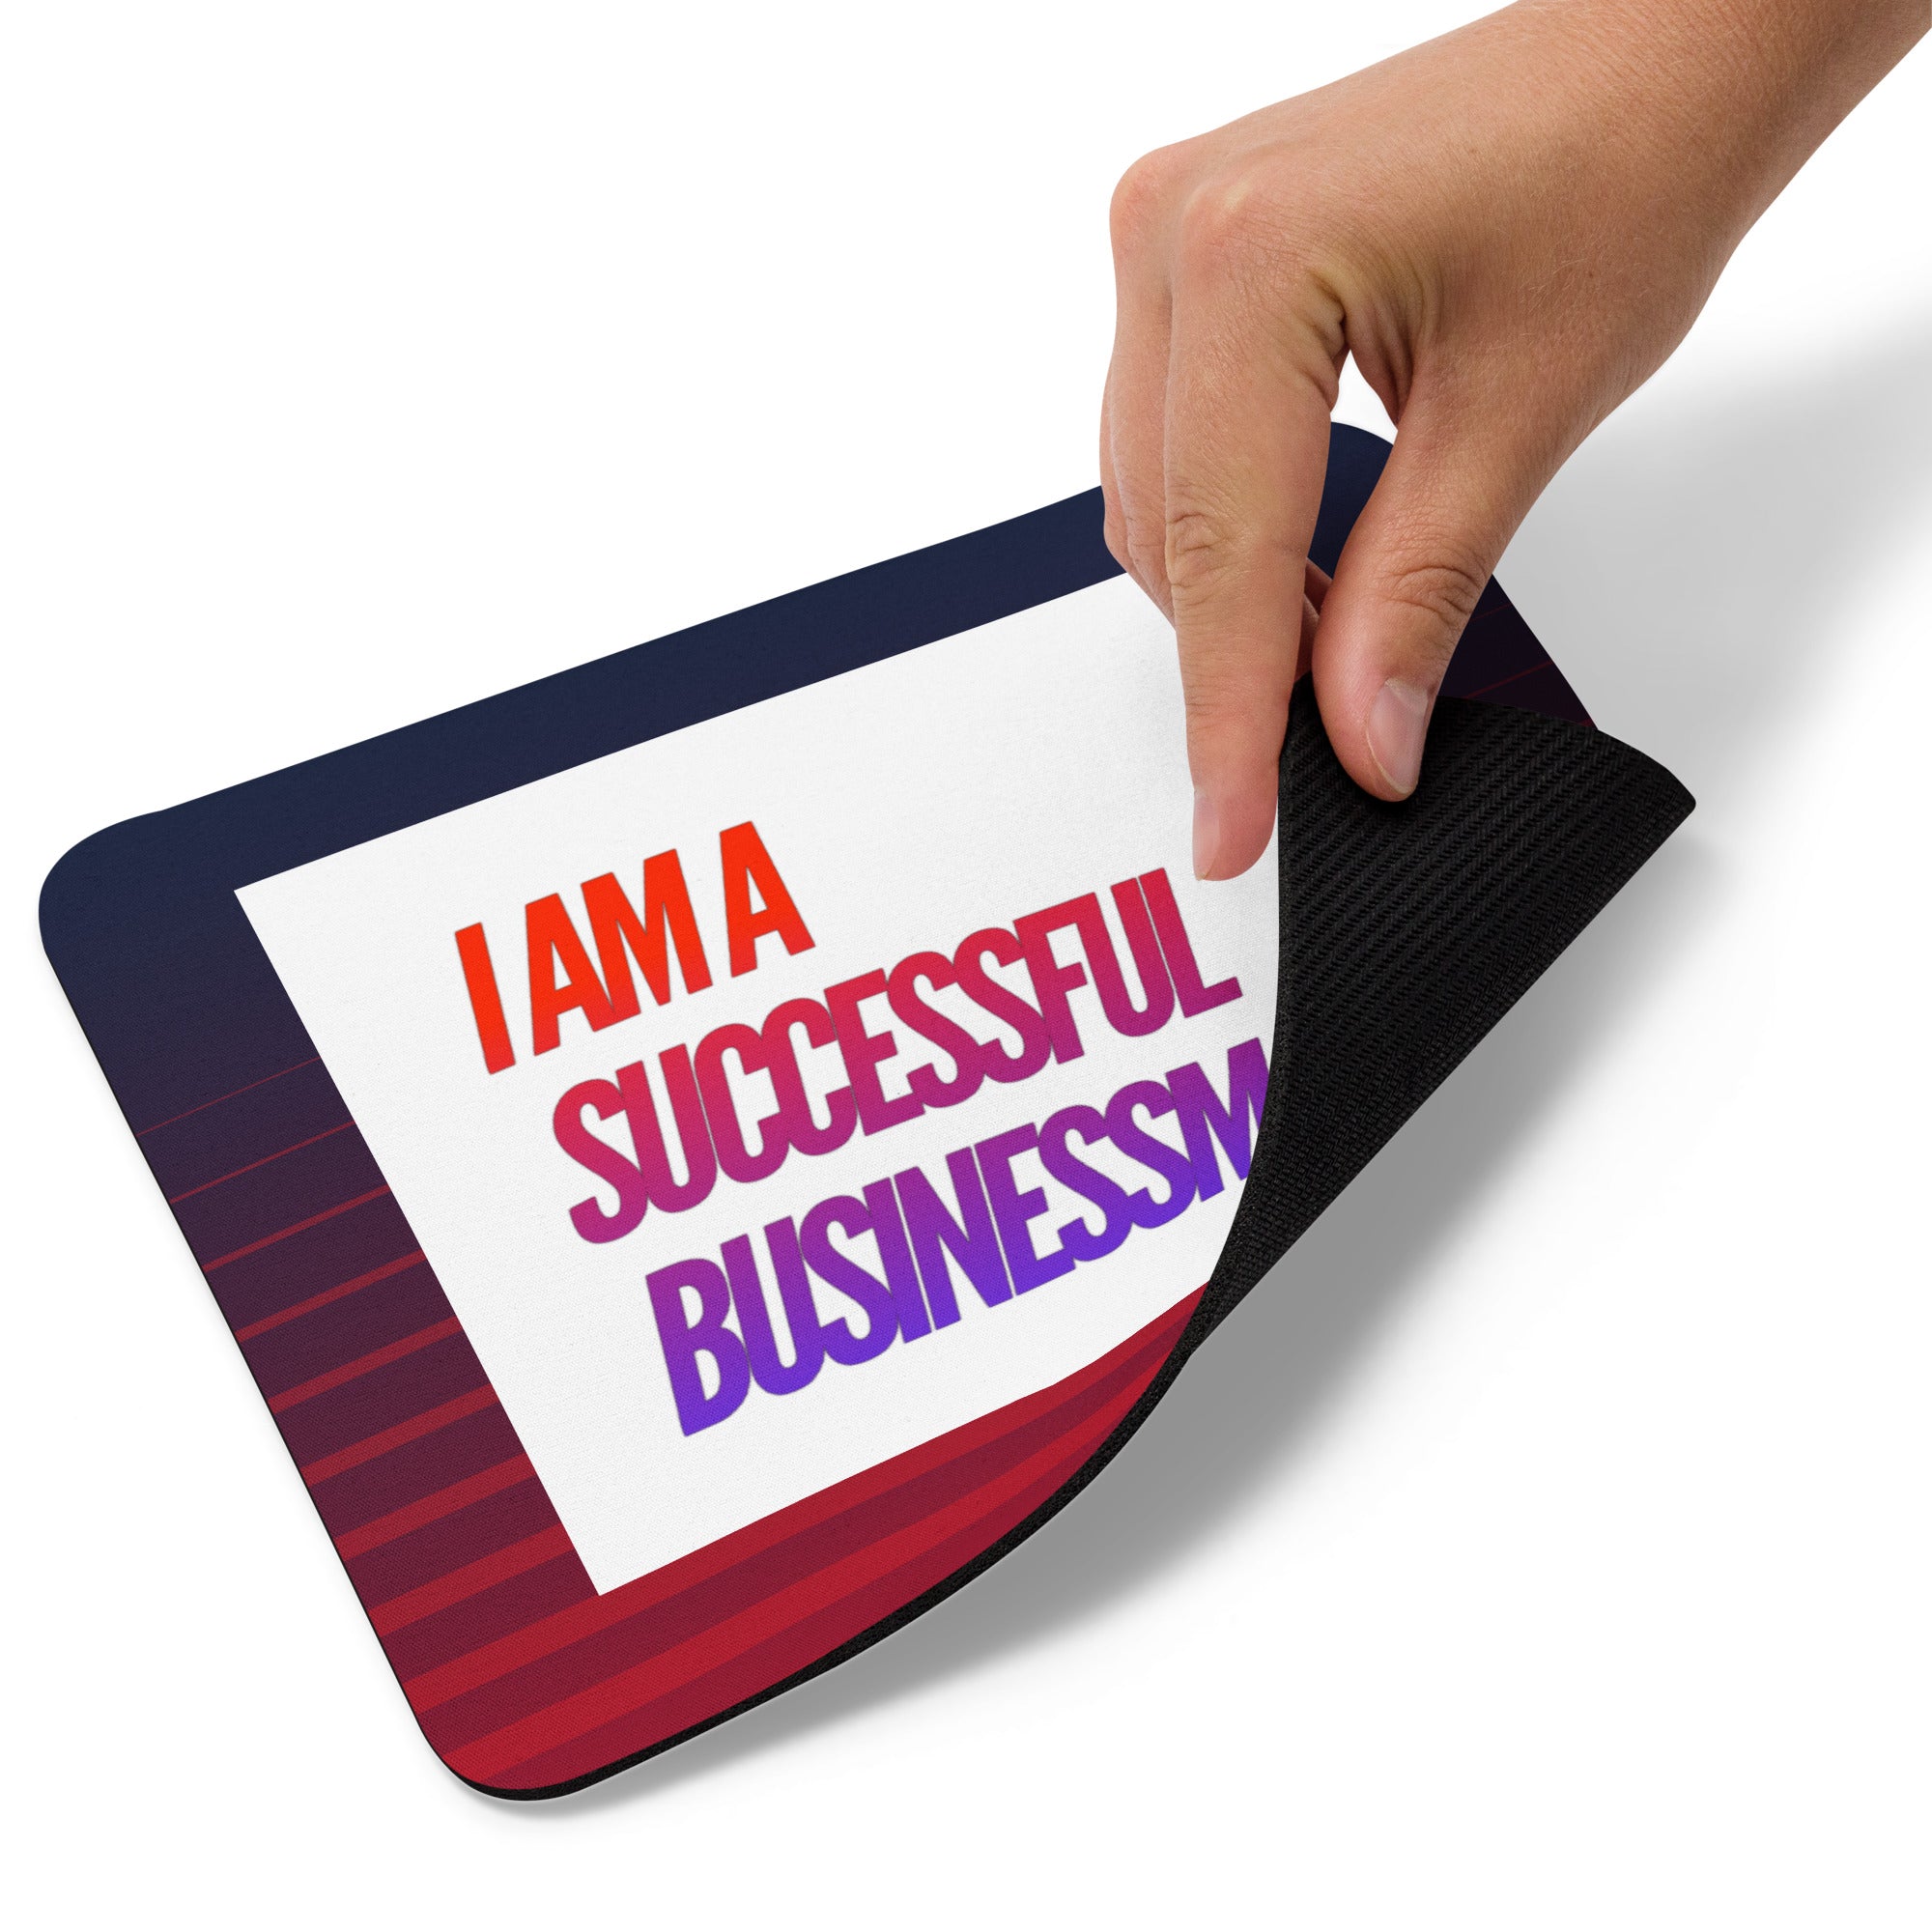 GloWell Designs - Mouse Pad - Affirmation Quote - I Am a Successful Businessman - GloWell Designs